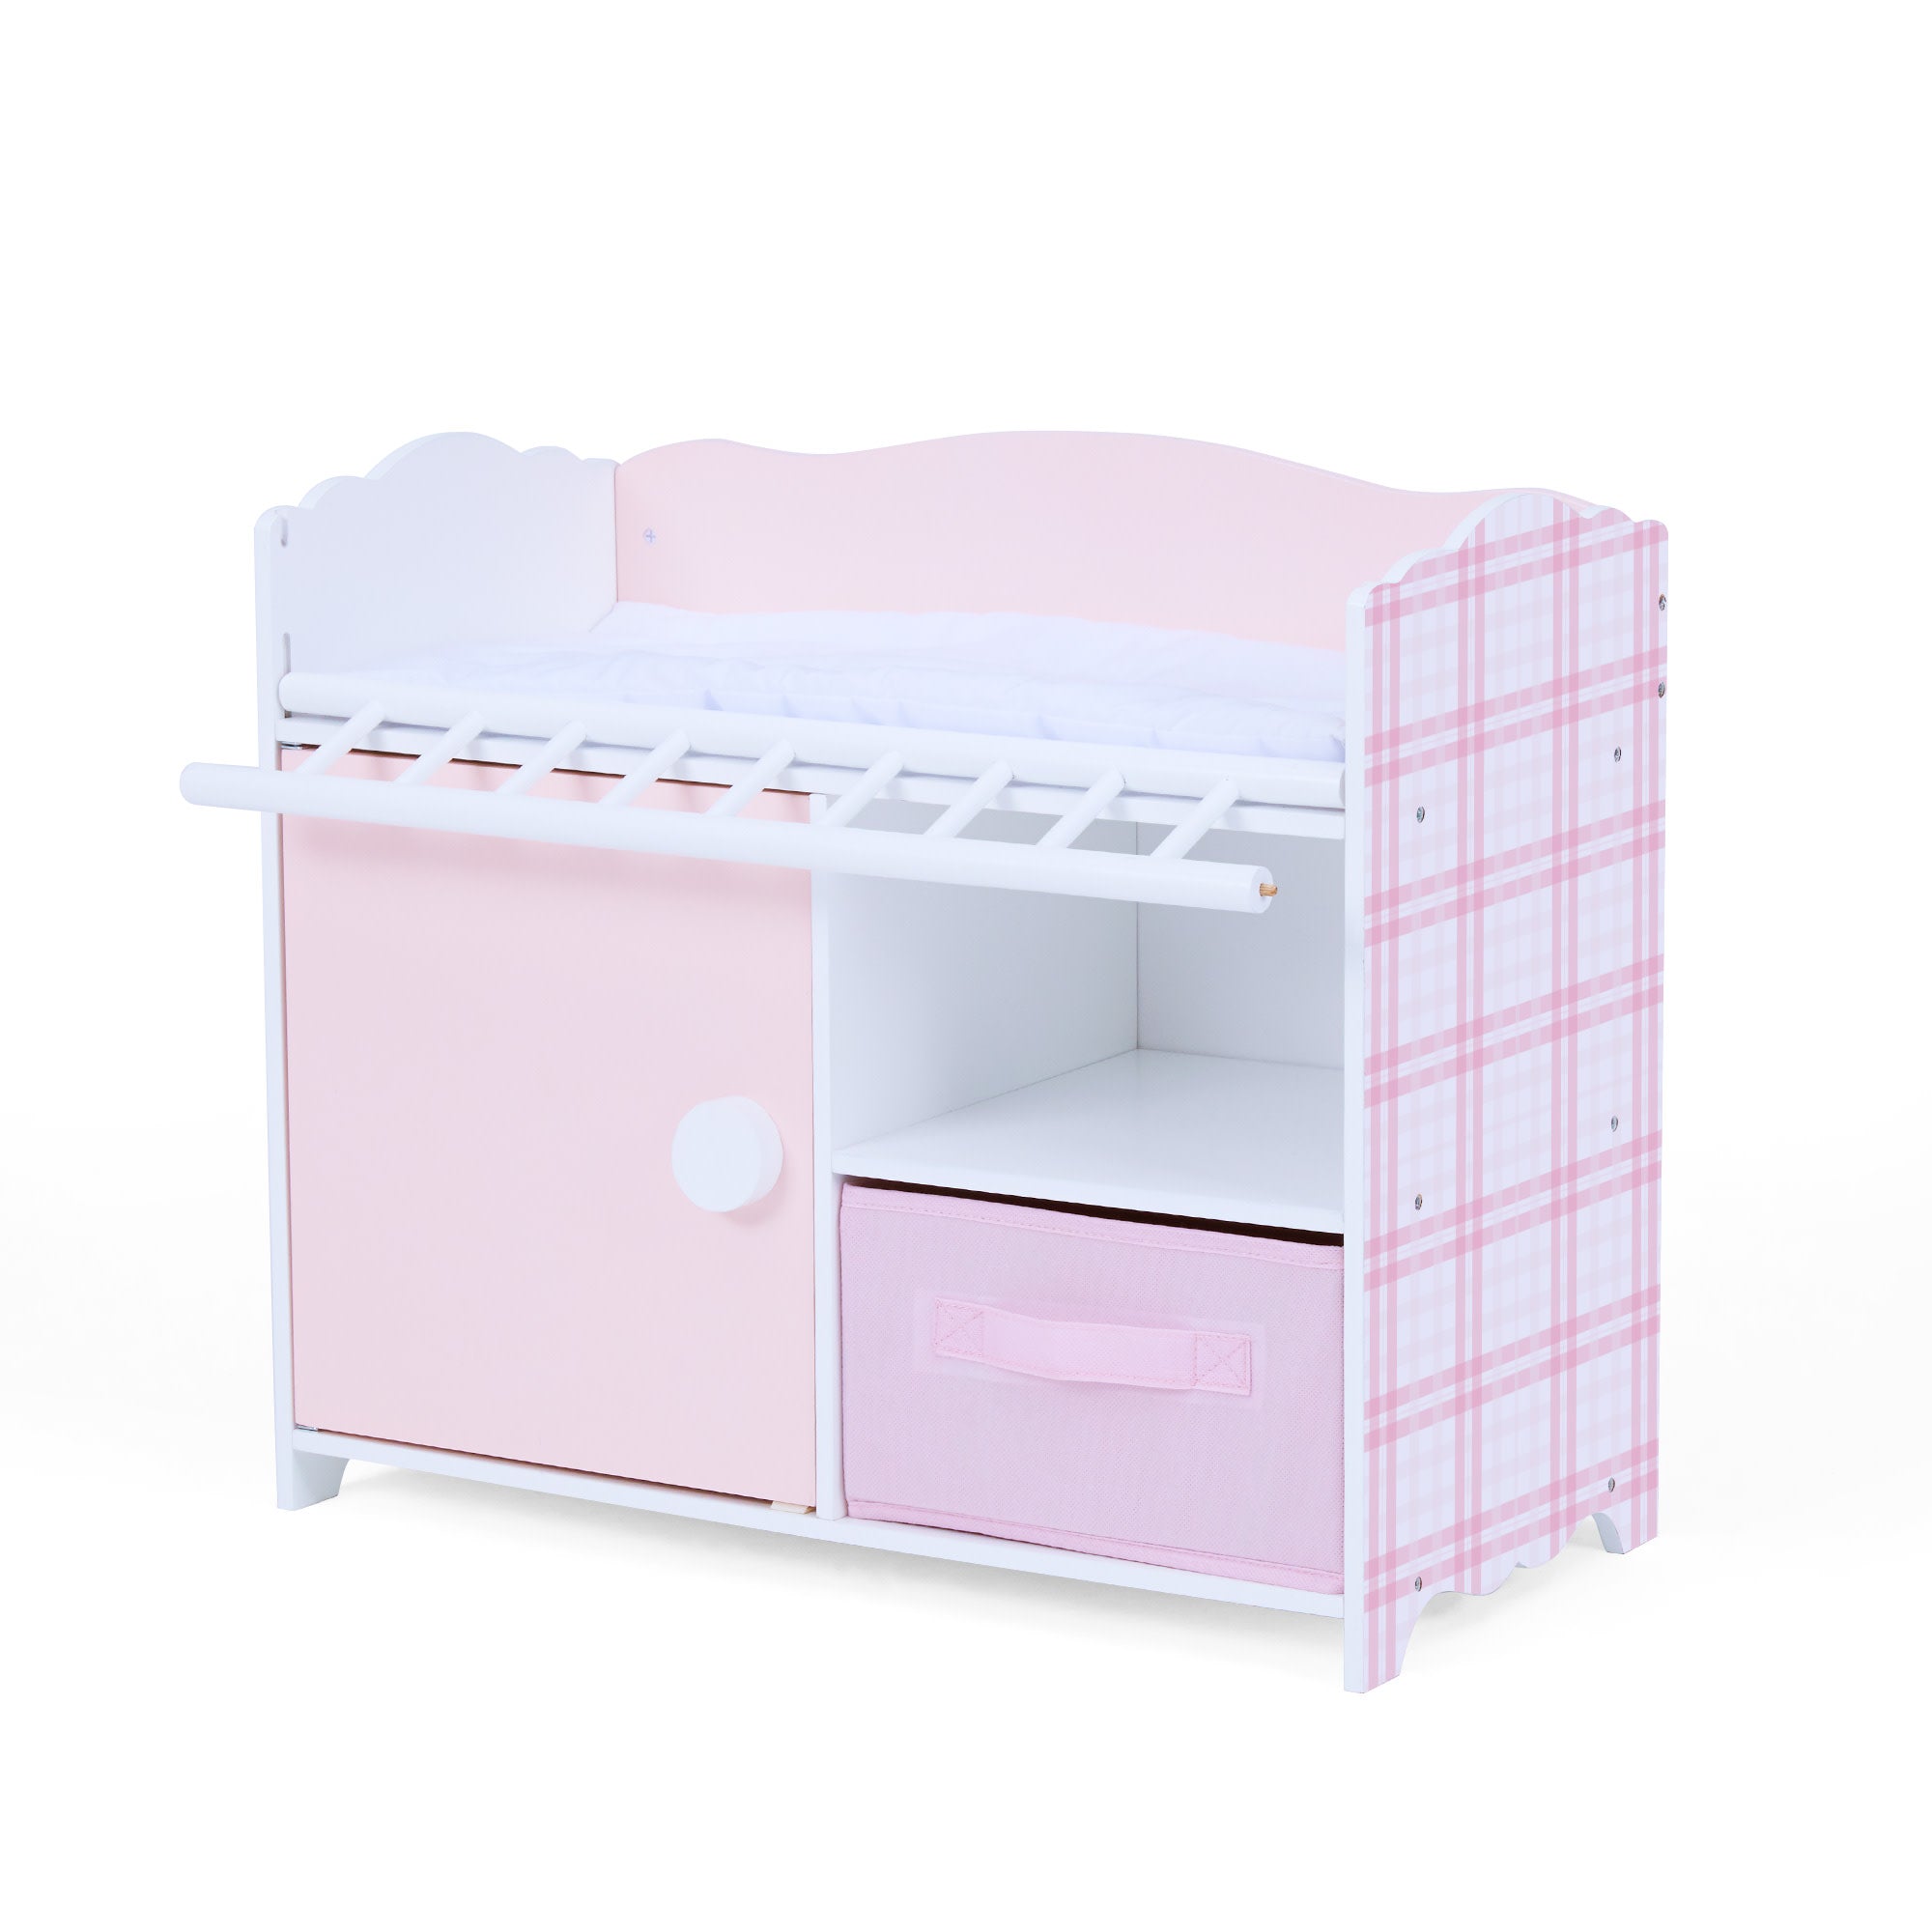 Olivia's Little World Aurora Princess Baby Doll Crib with Storage and Accessories for 15" Dolls, Pink